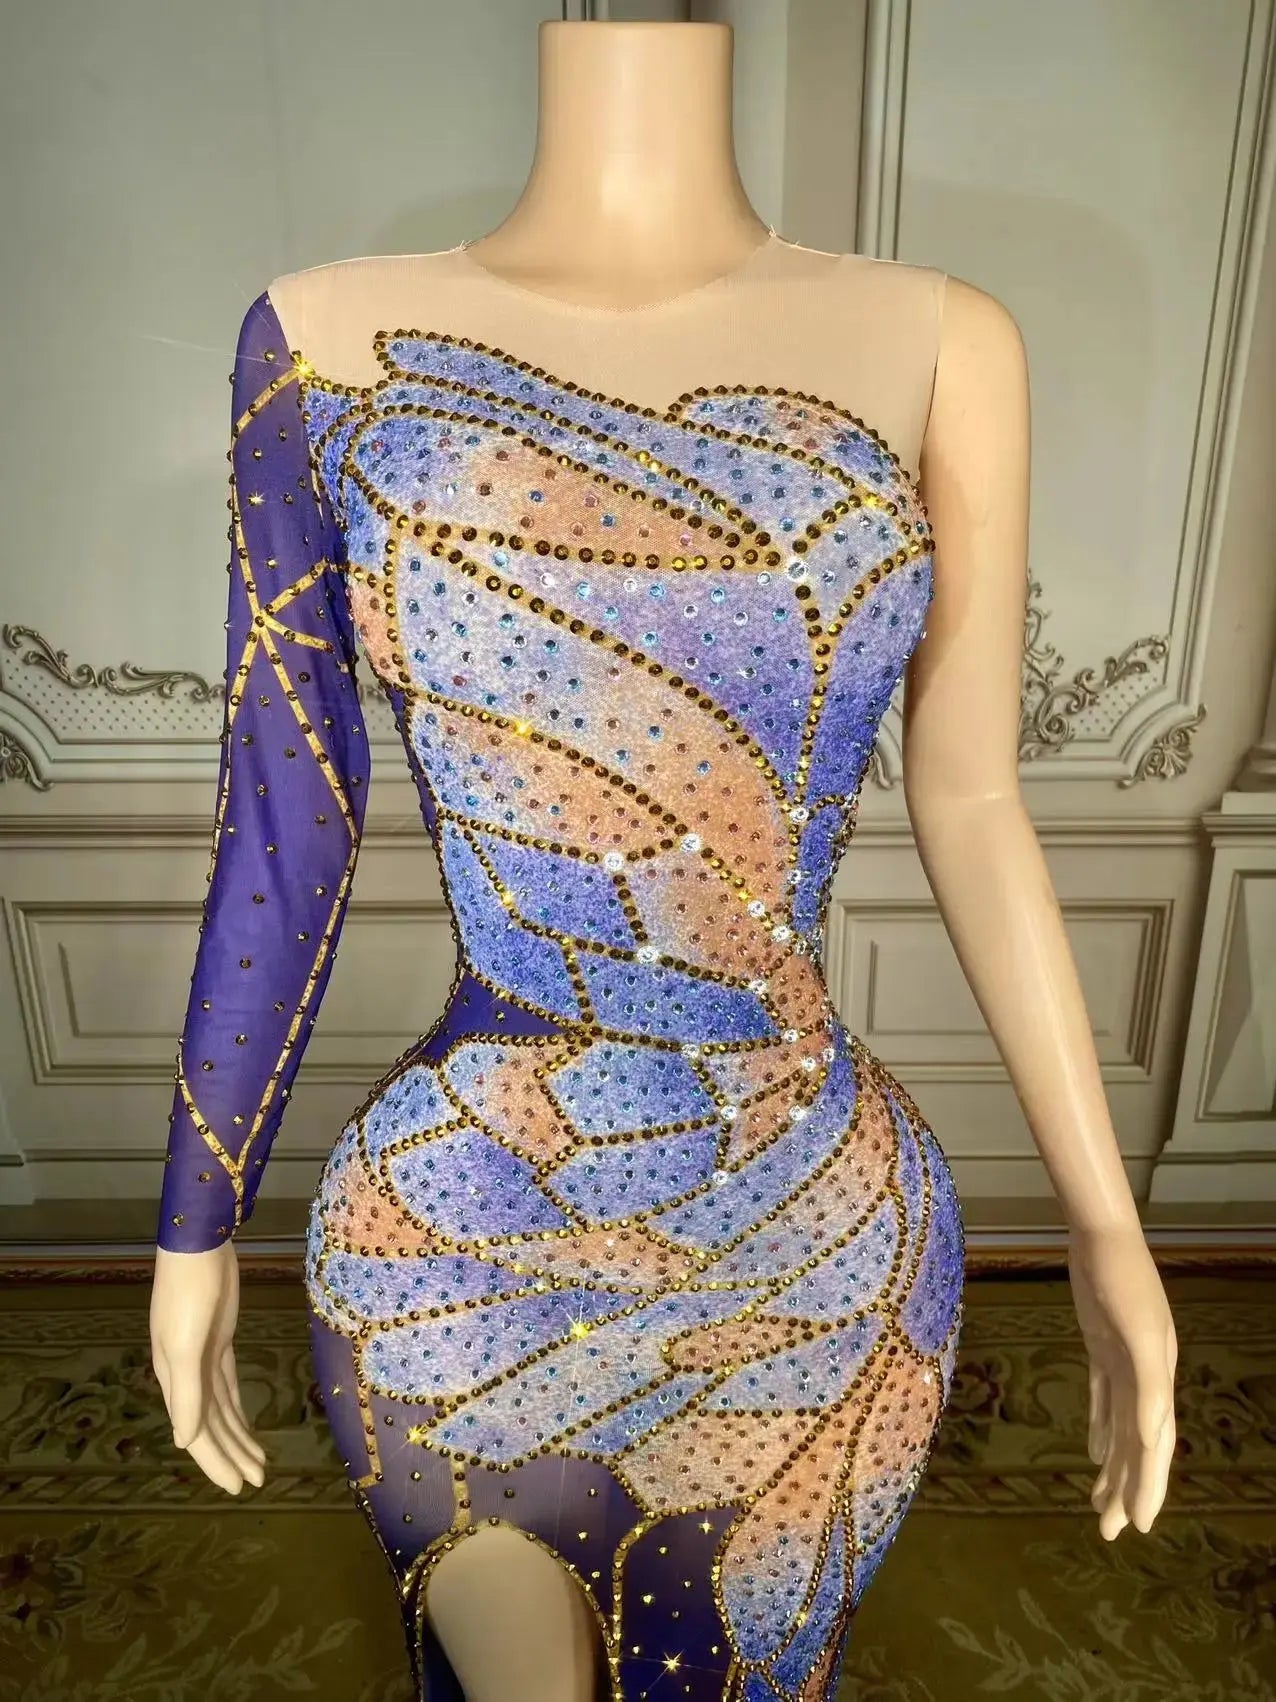 ZD Single Sleeved Colorful Rhinestones Dress Women Party Long Dress Celebrate Evening Prom Dress Stage Festival Outfit - Image #2